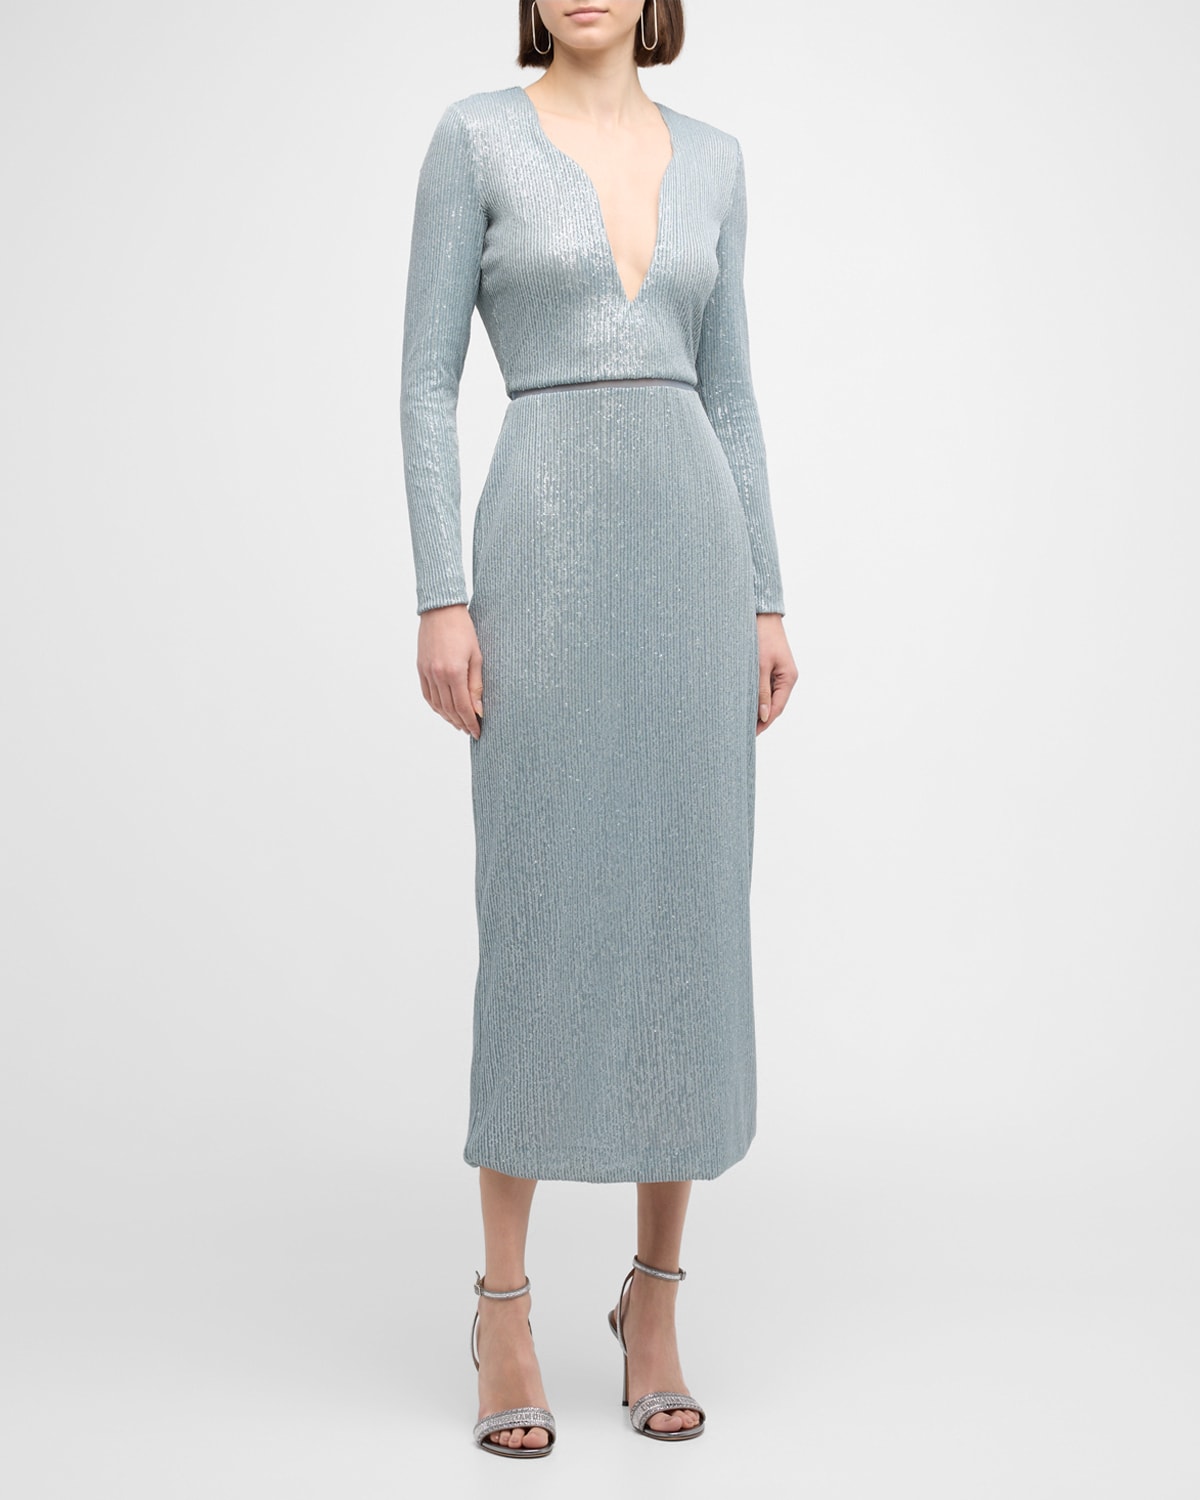 Giorgio Armani Plunging Sequined Knit Dress In Solid Medium Blue